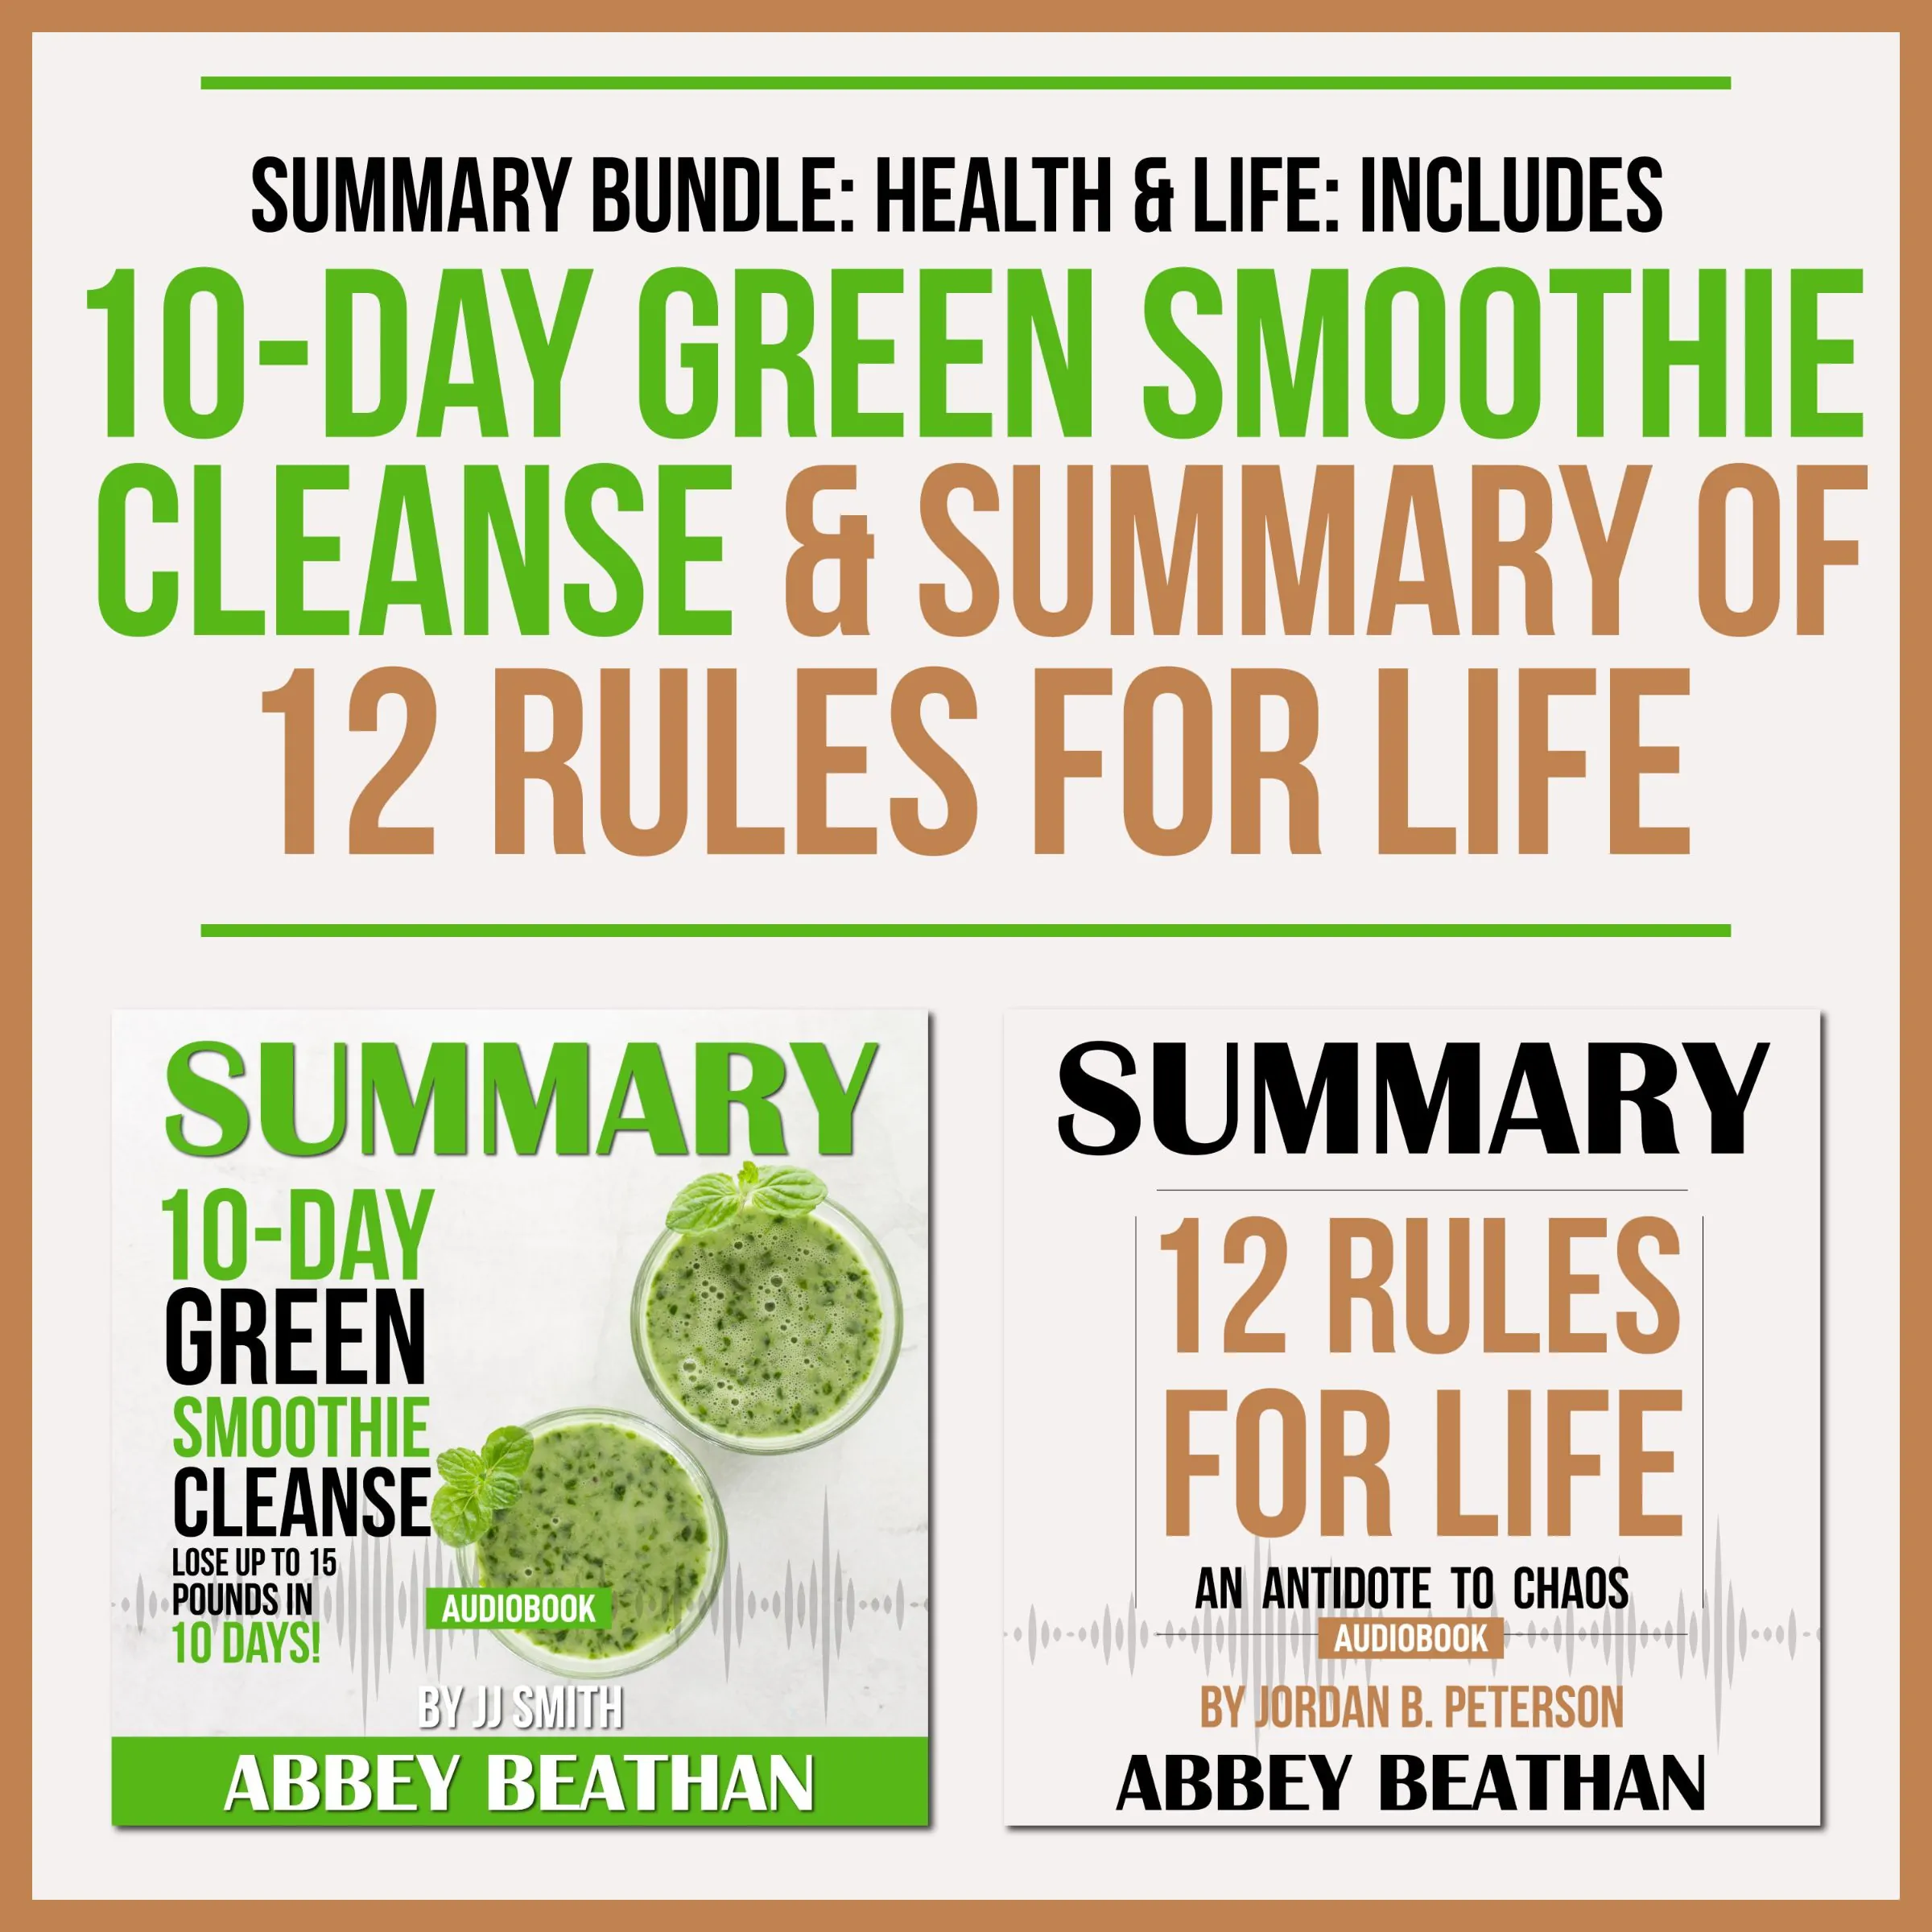 Summary Bundle: Health & Life: Includes Summary of 10-Day Green Smoothie Cleanse & Summary of 12 Rules for Life Audiobook by Abbey Beathan